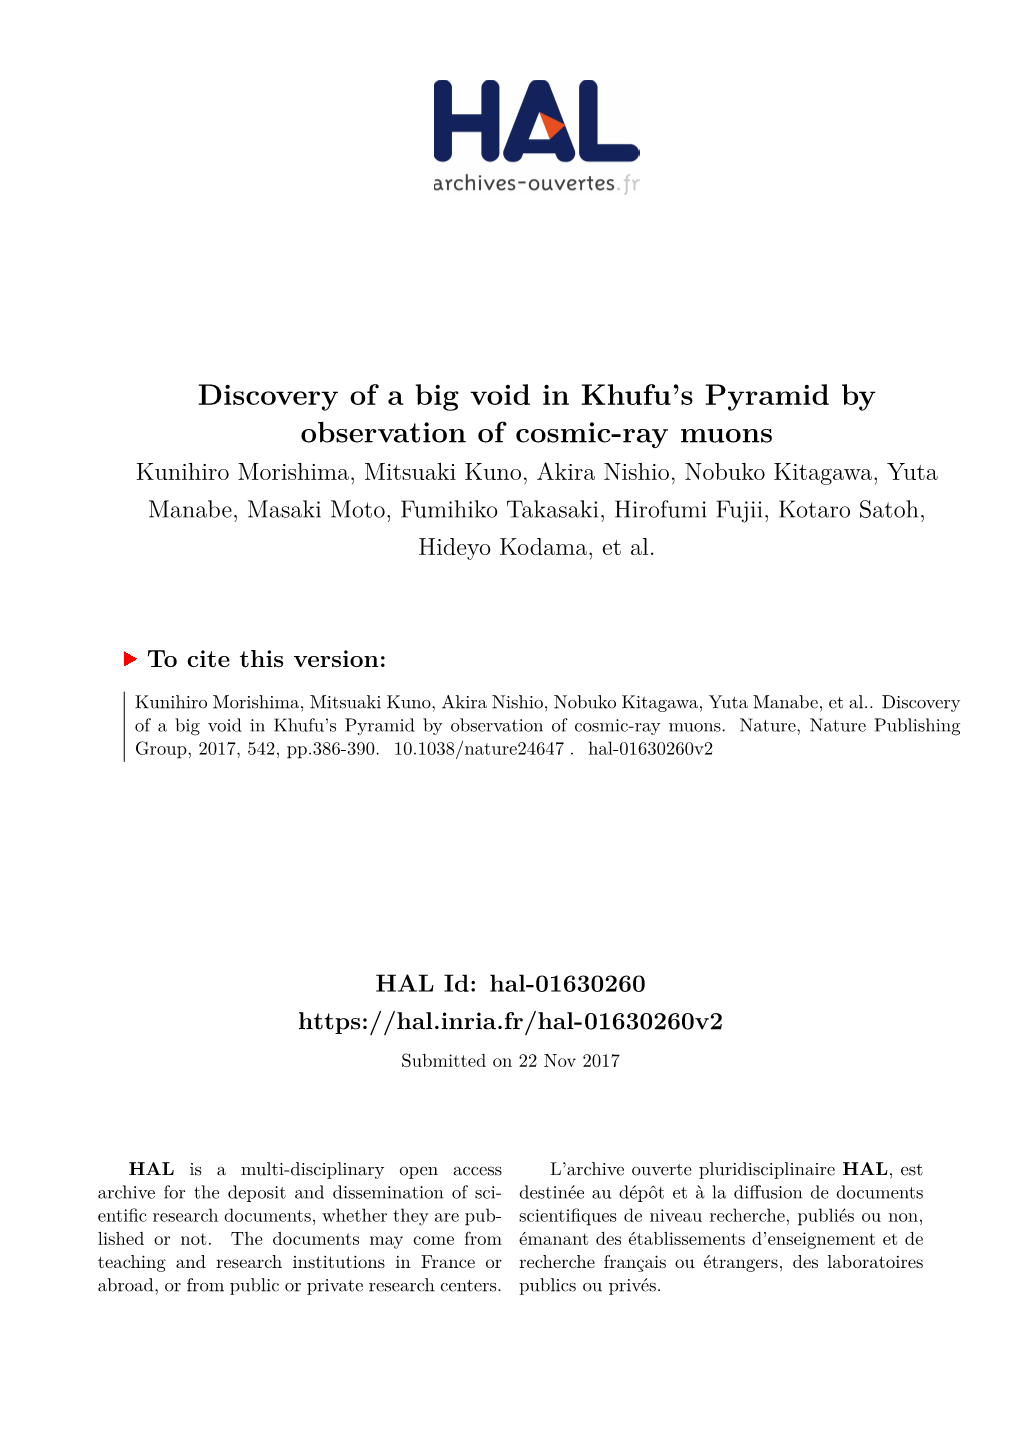 Discovery of a Big Void in Khufu's Pyramid by Observation